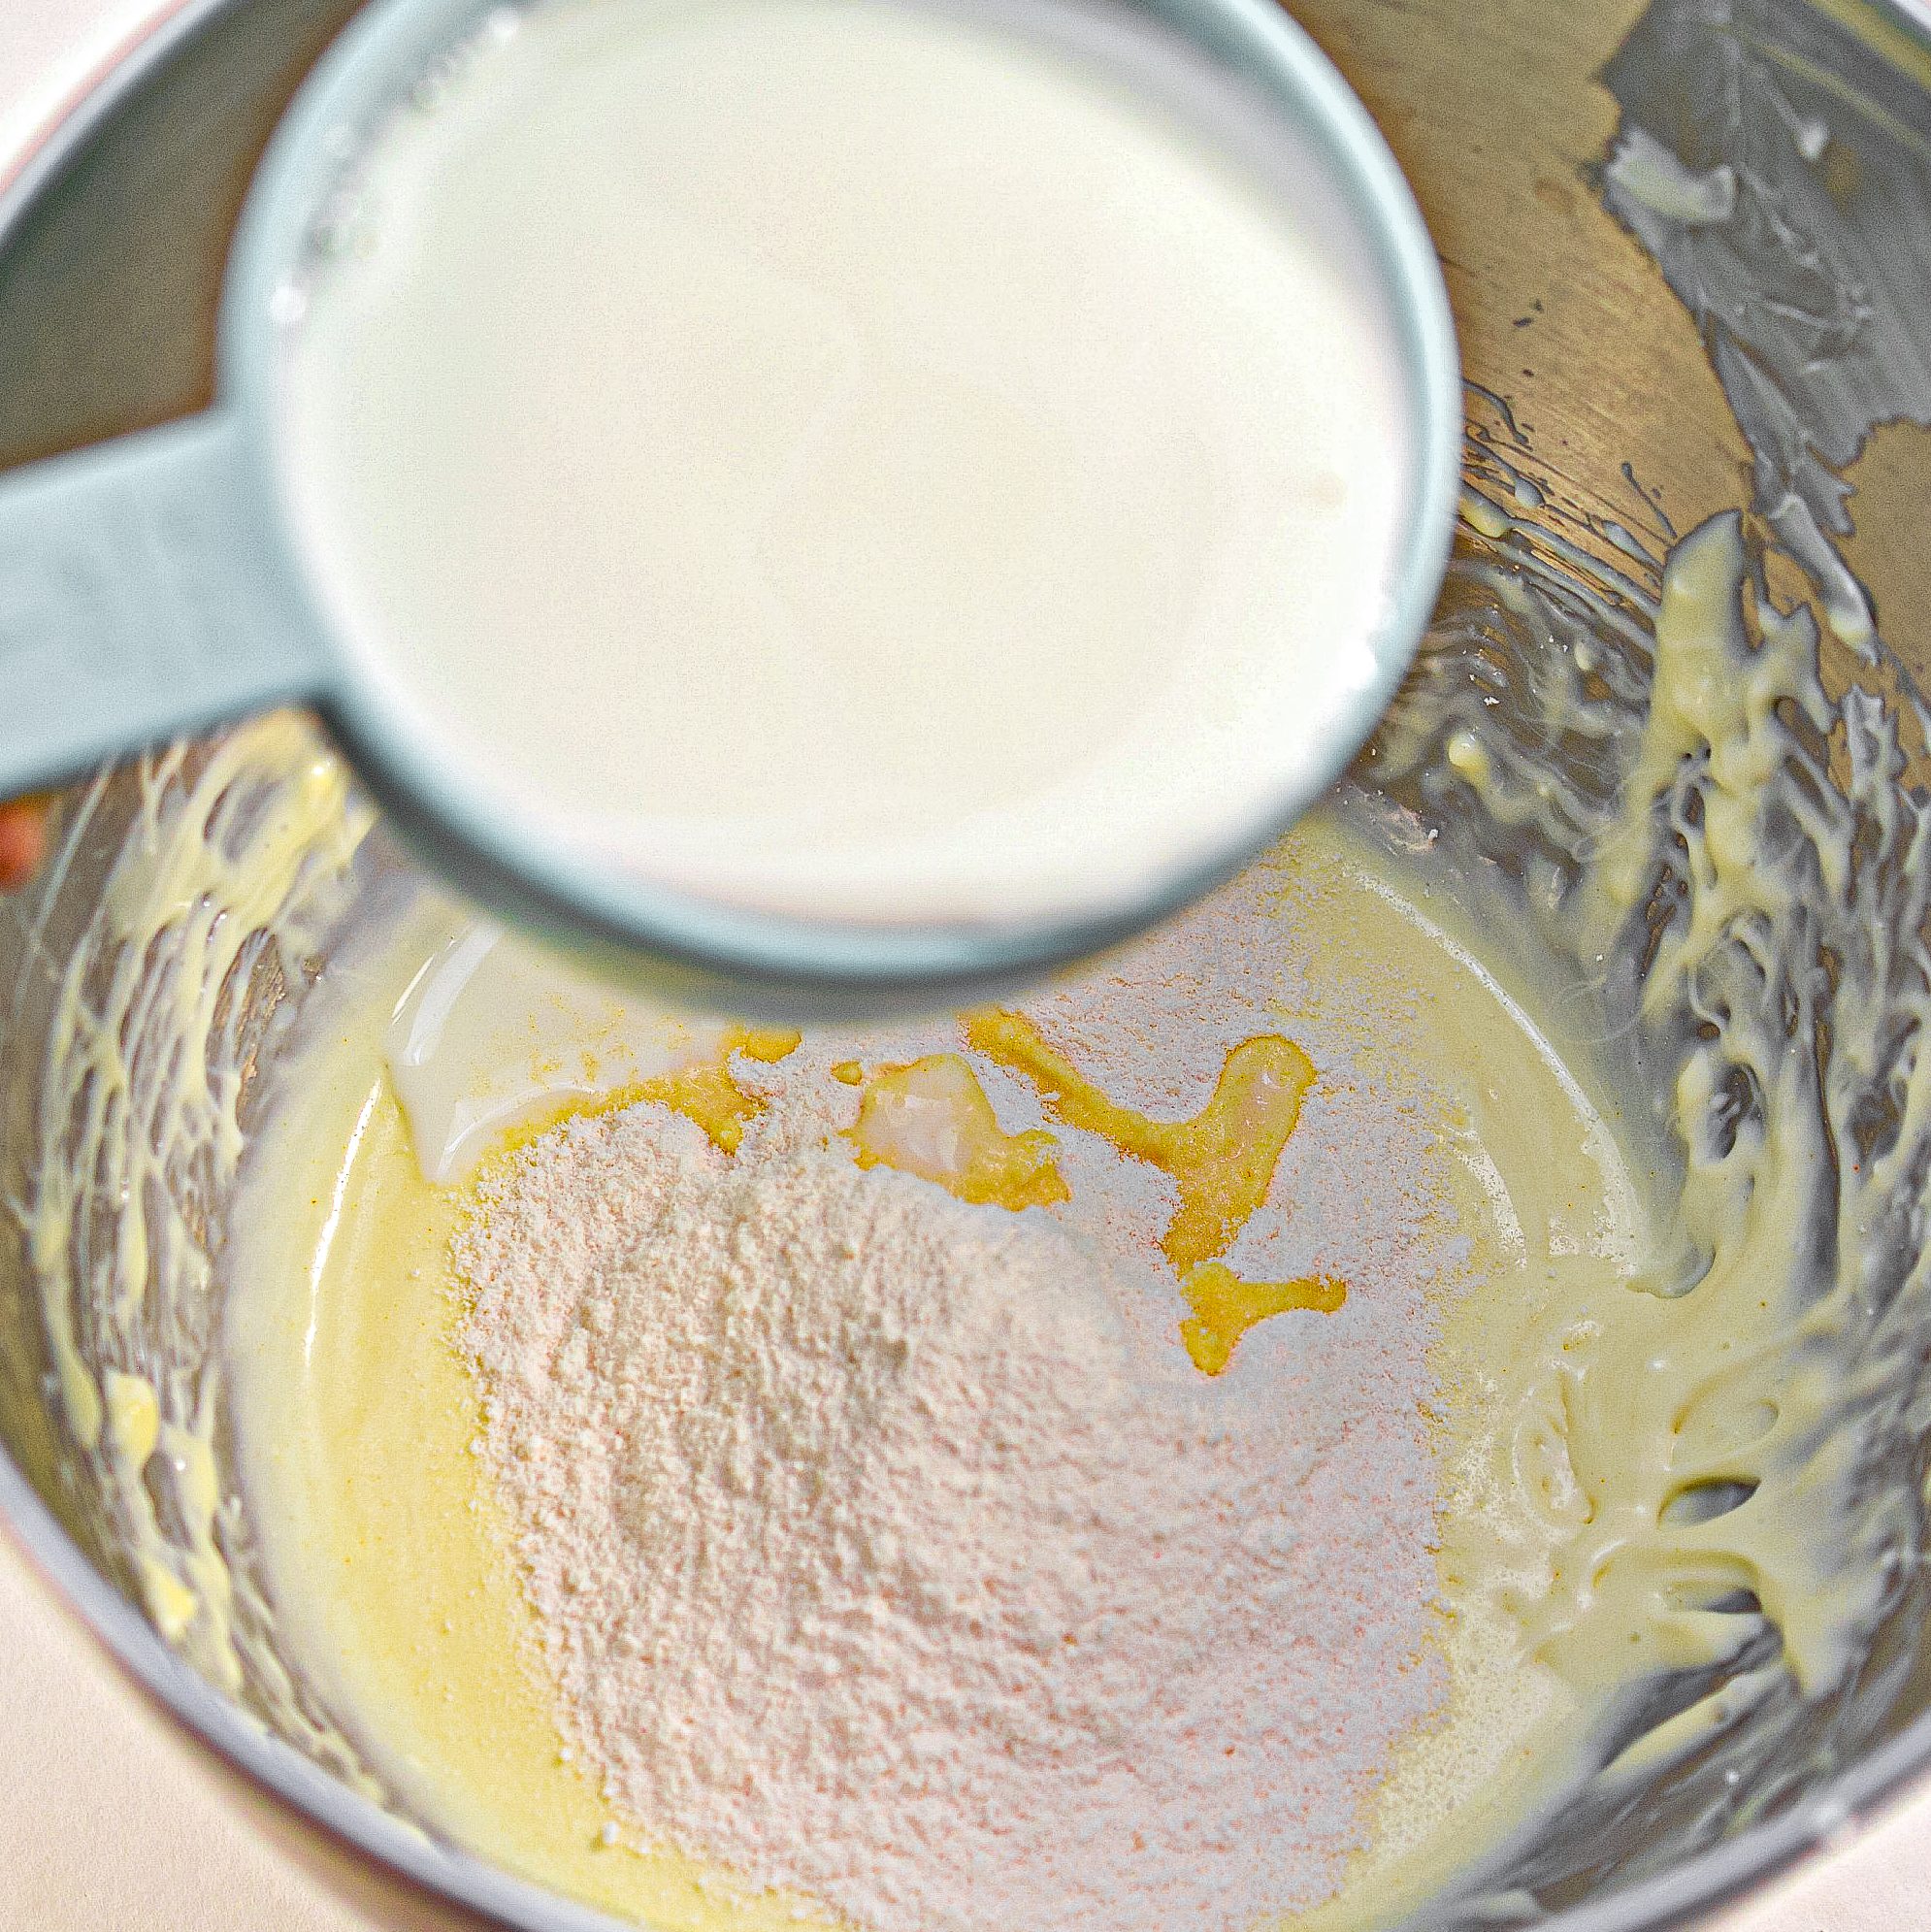 Add in the milk, pudding, and vanilla extract, and beat until the mixture thickens.